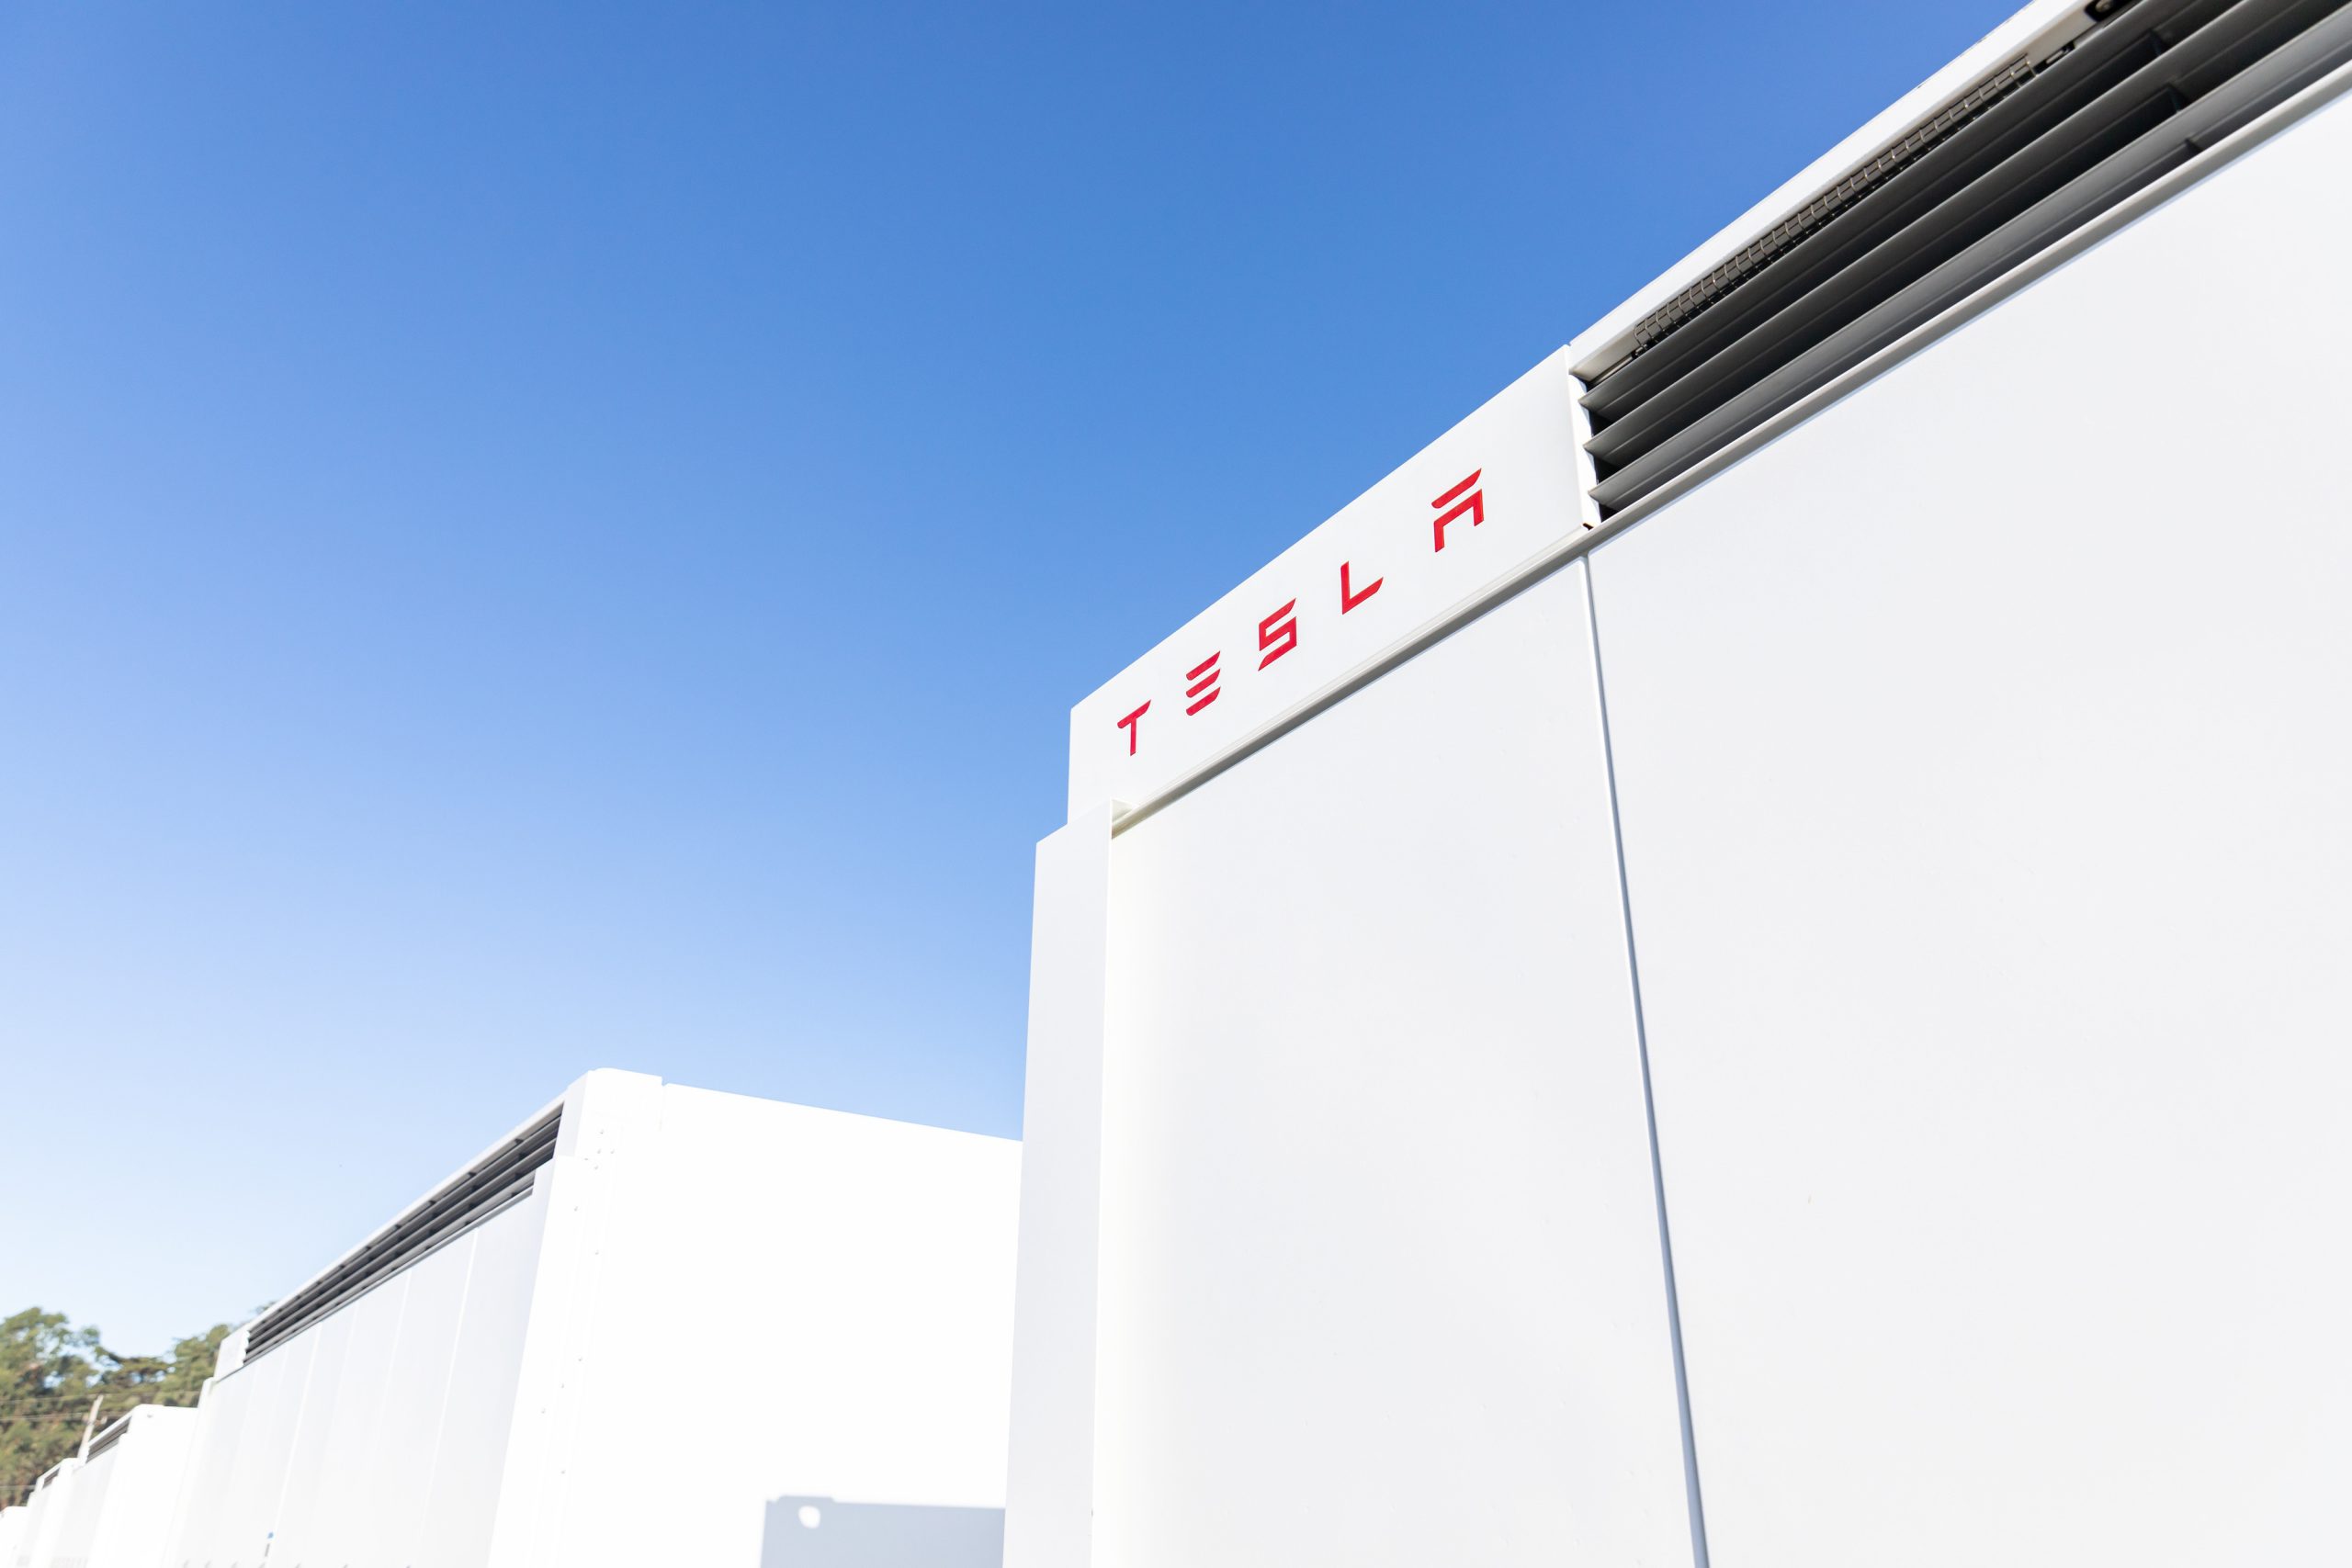 Tesla Megapack Pilot Project Launches at Willowbrook Mall